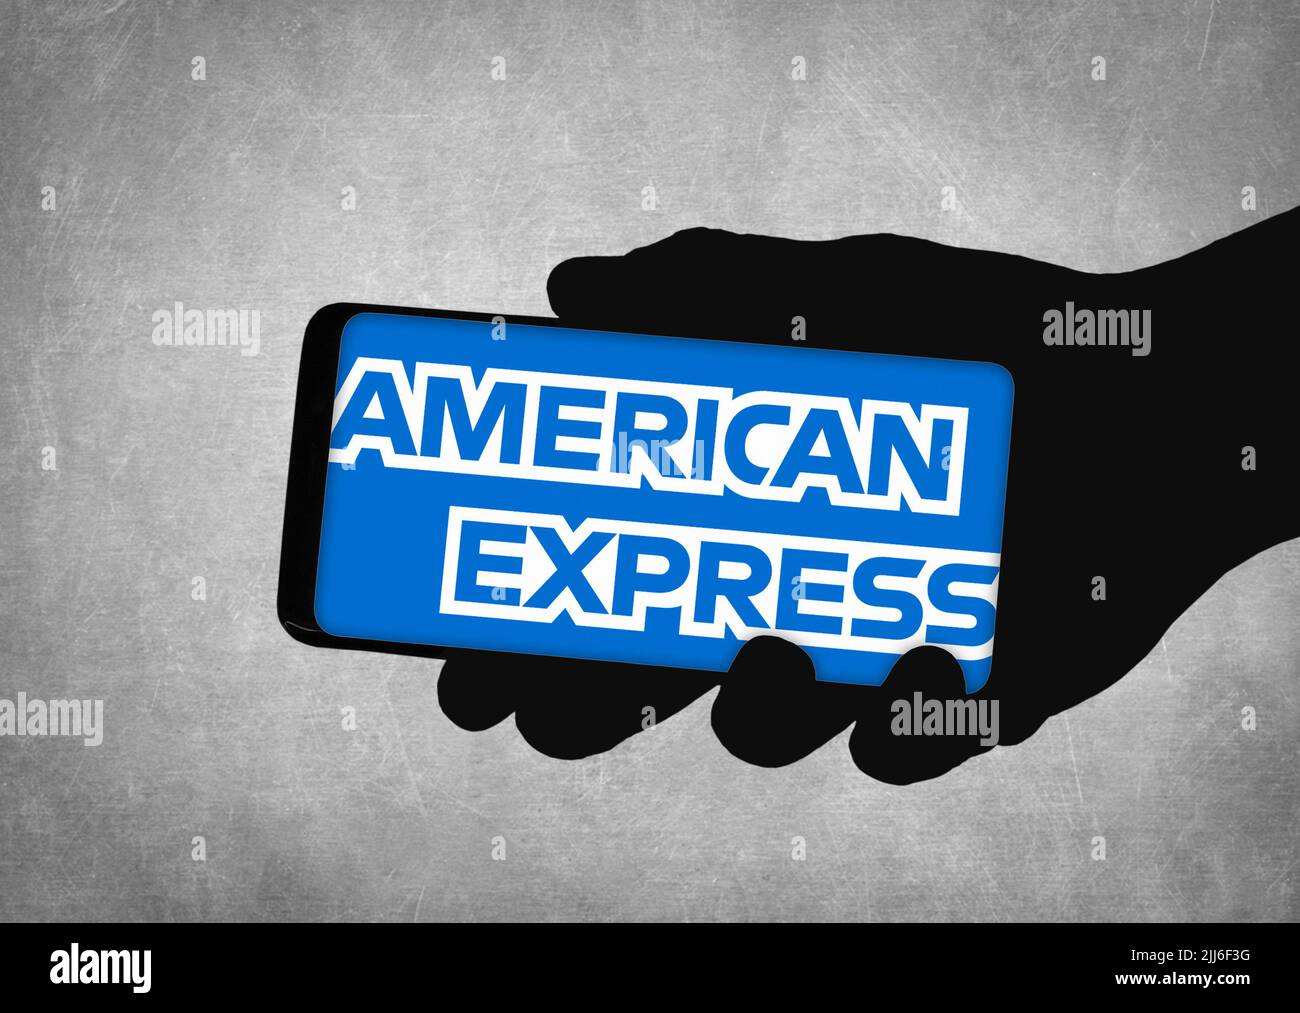 American Express company logo on mobile device Stock Photo